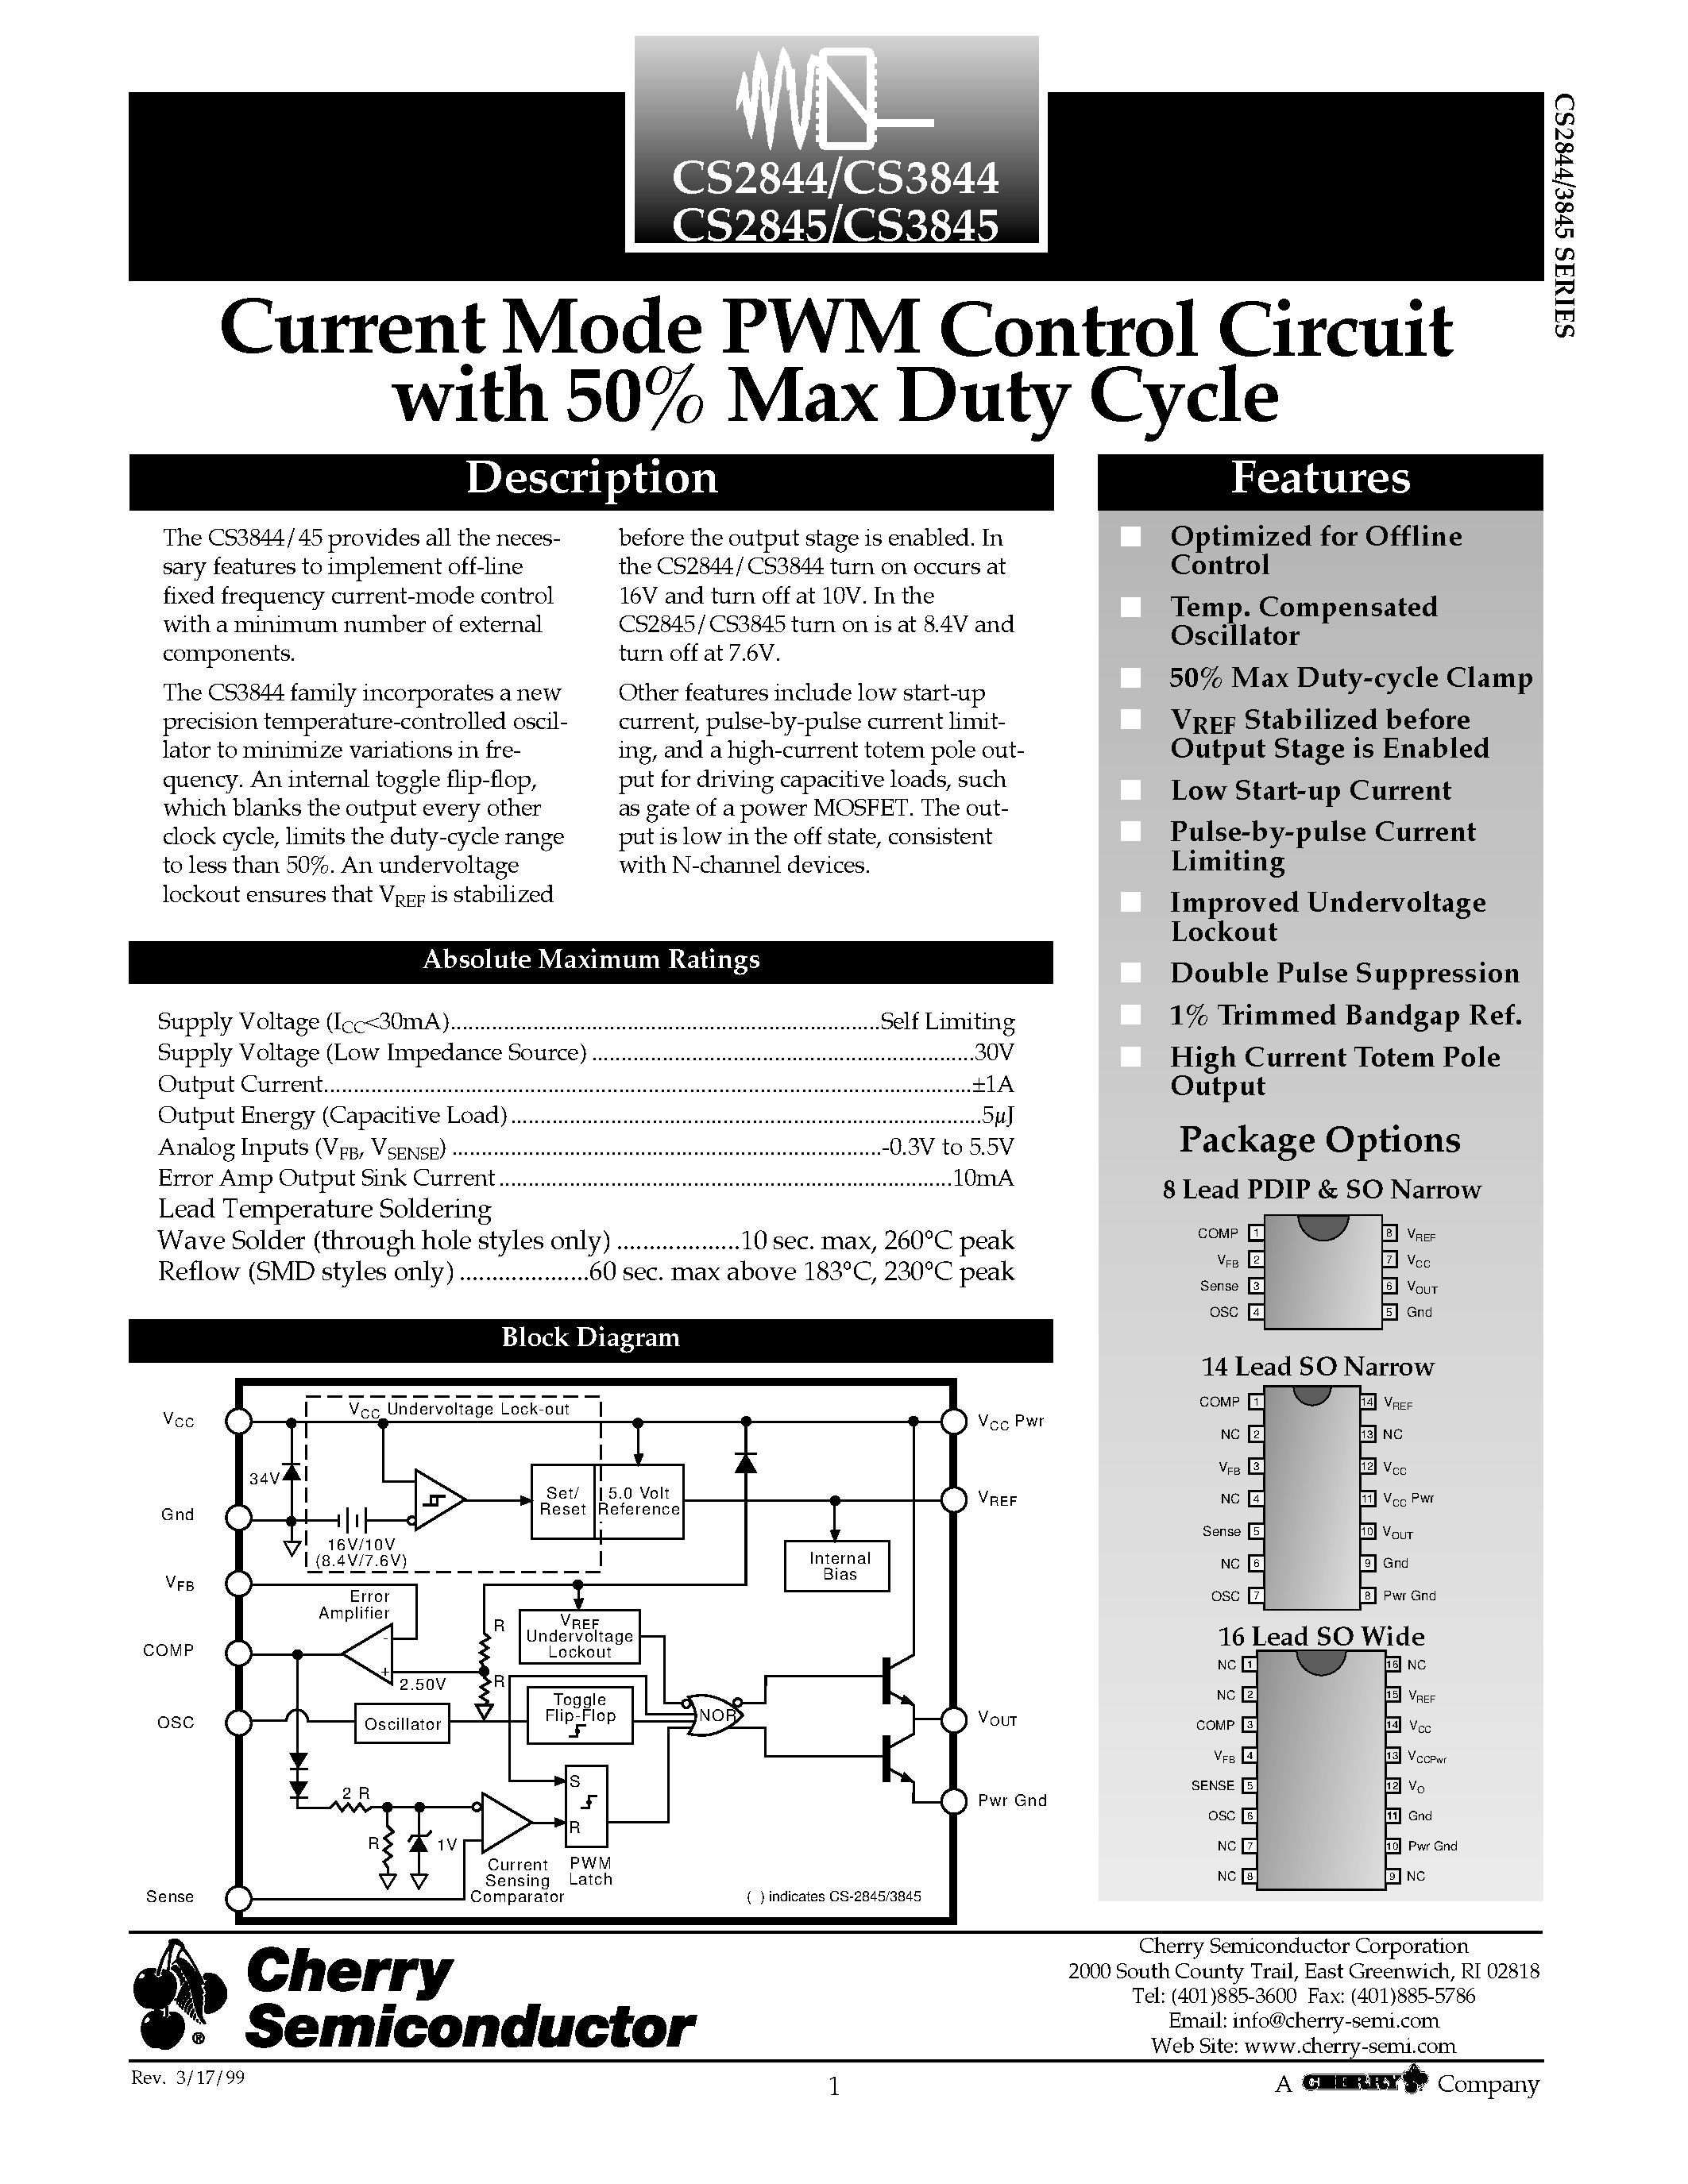 Datasheet CS2844 - Current Mode PWM Control Circuit with 50% Max Duty Cycle page 1